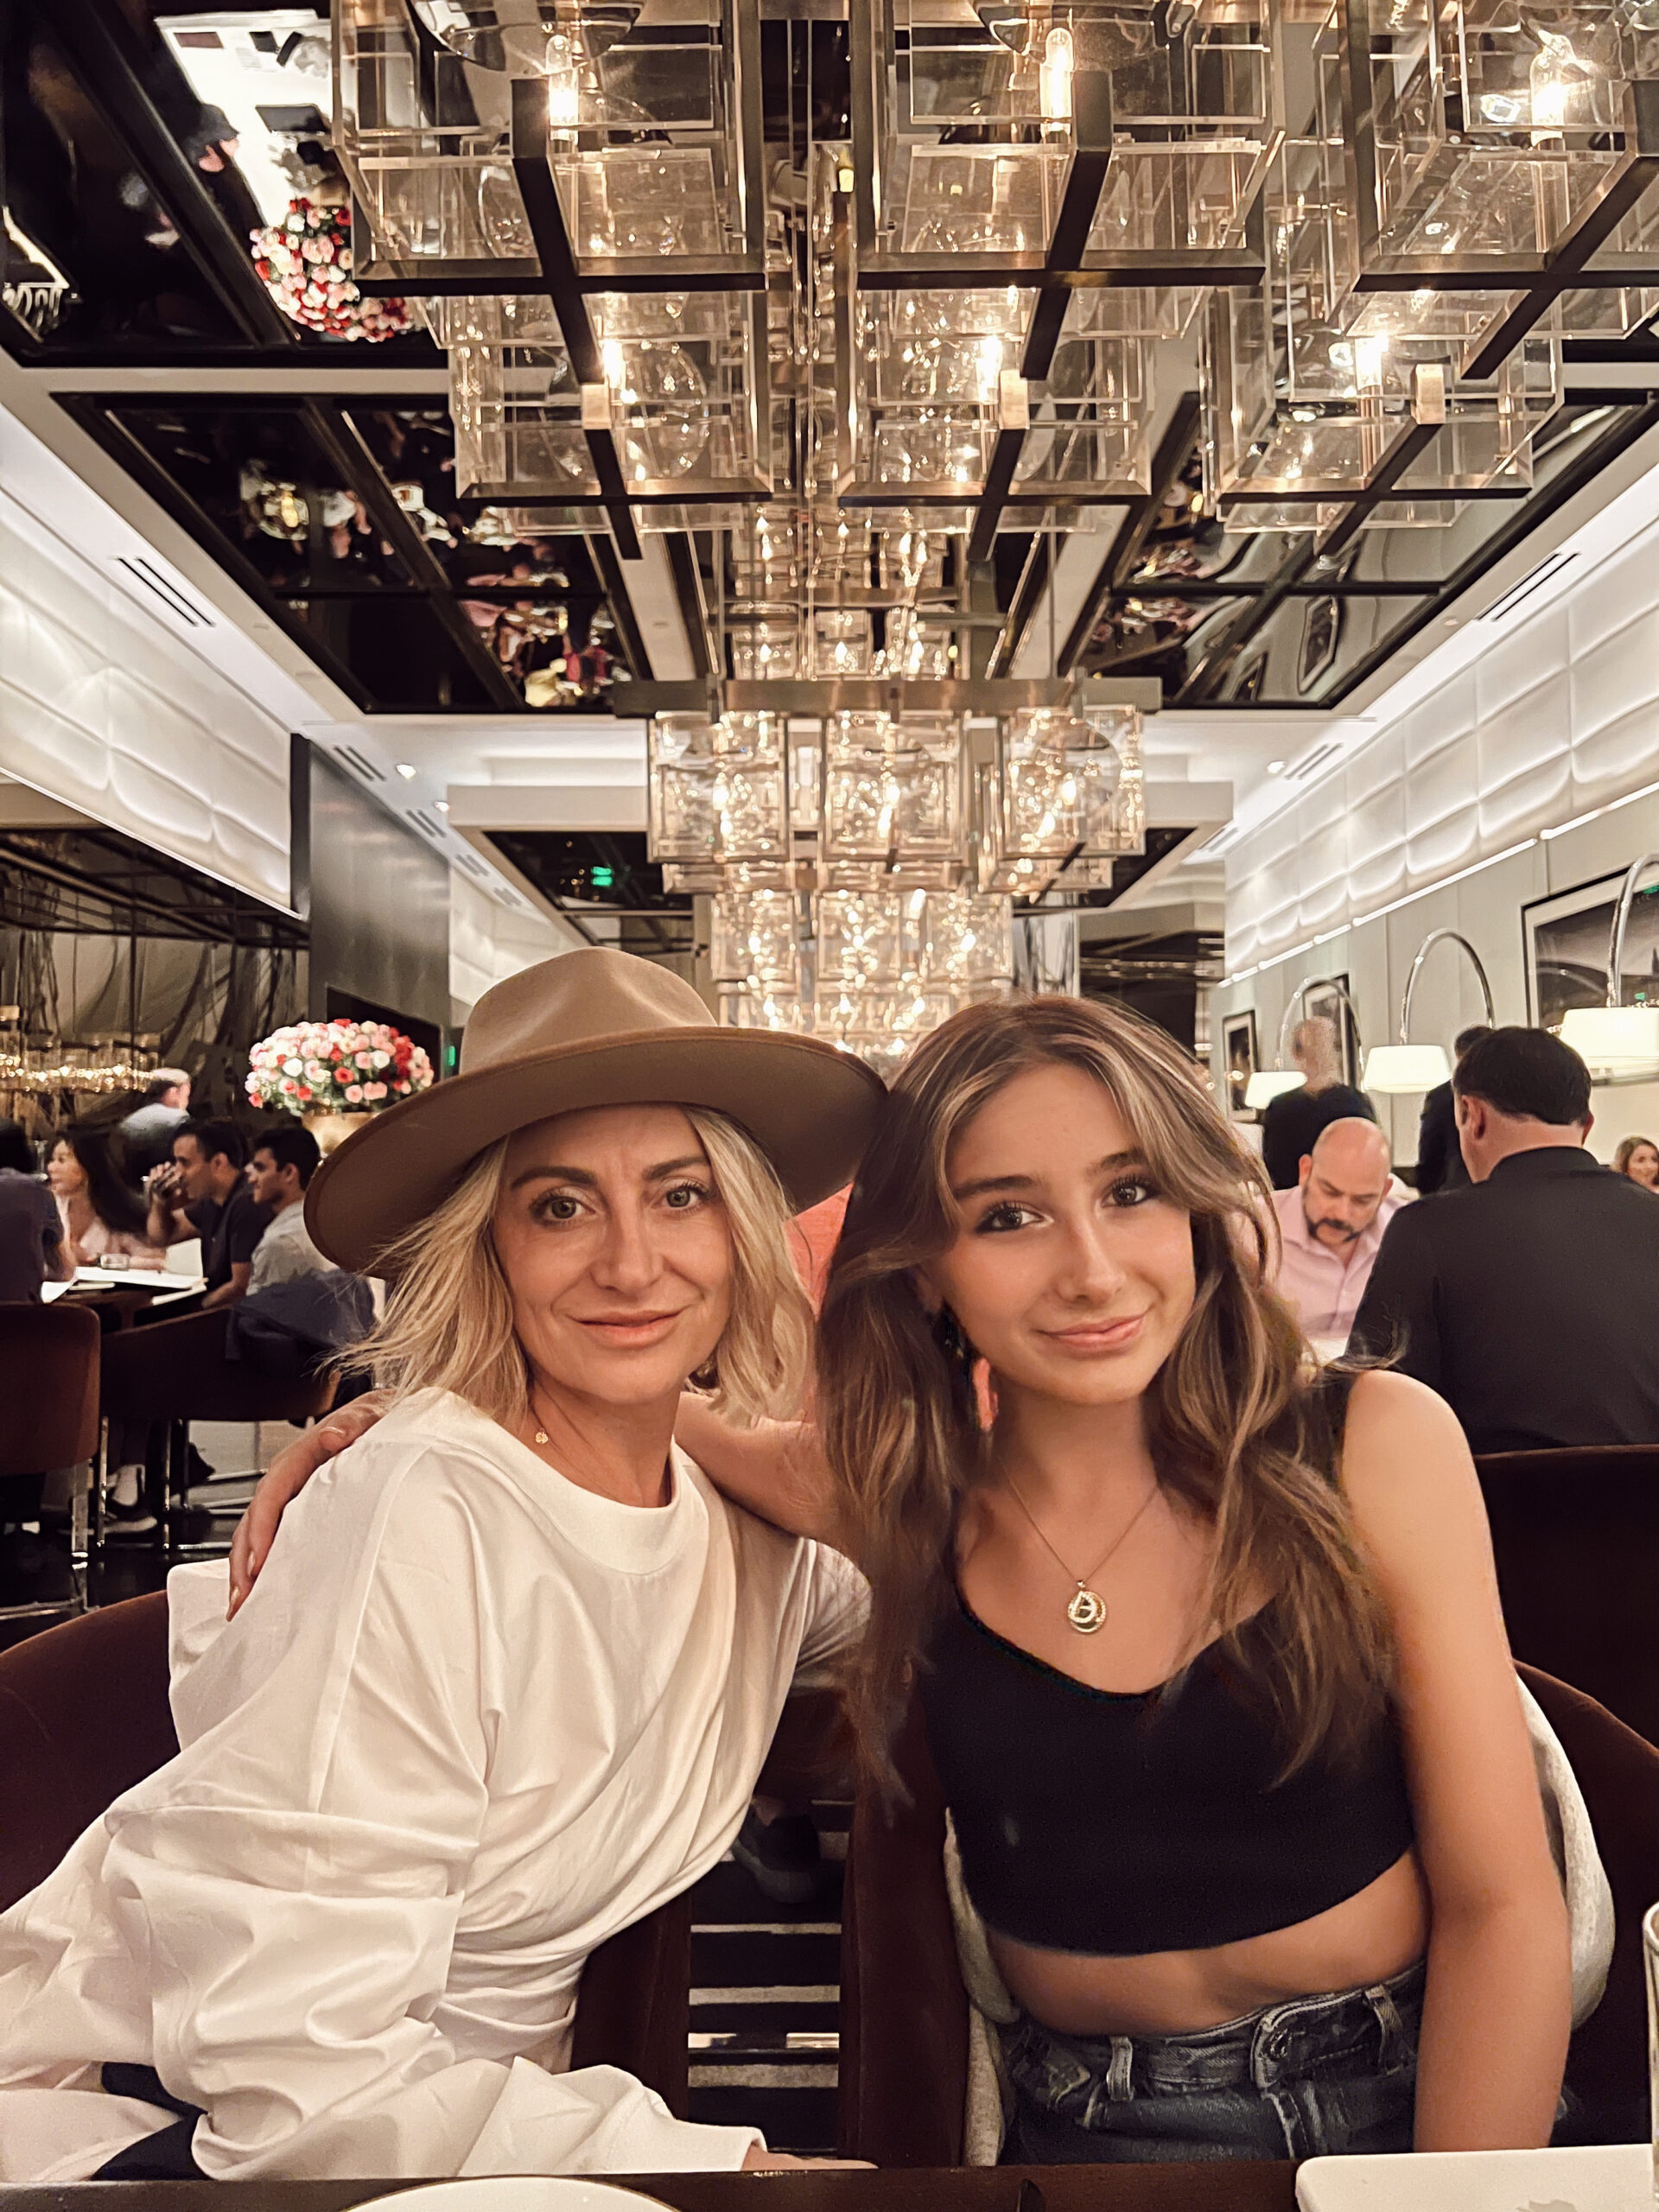 mom and daughter sitting together in restaurant